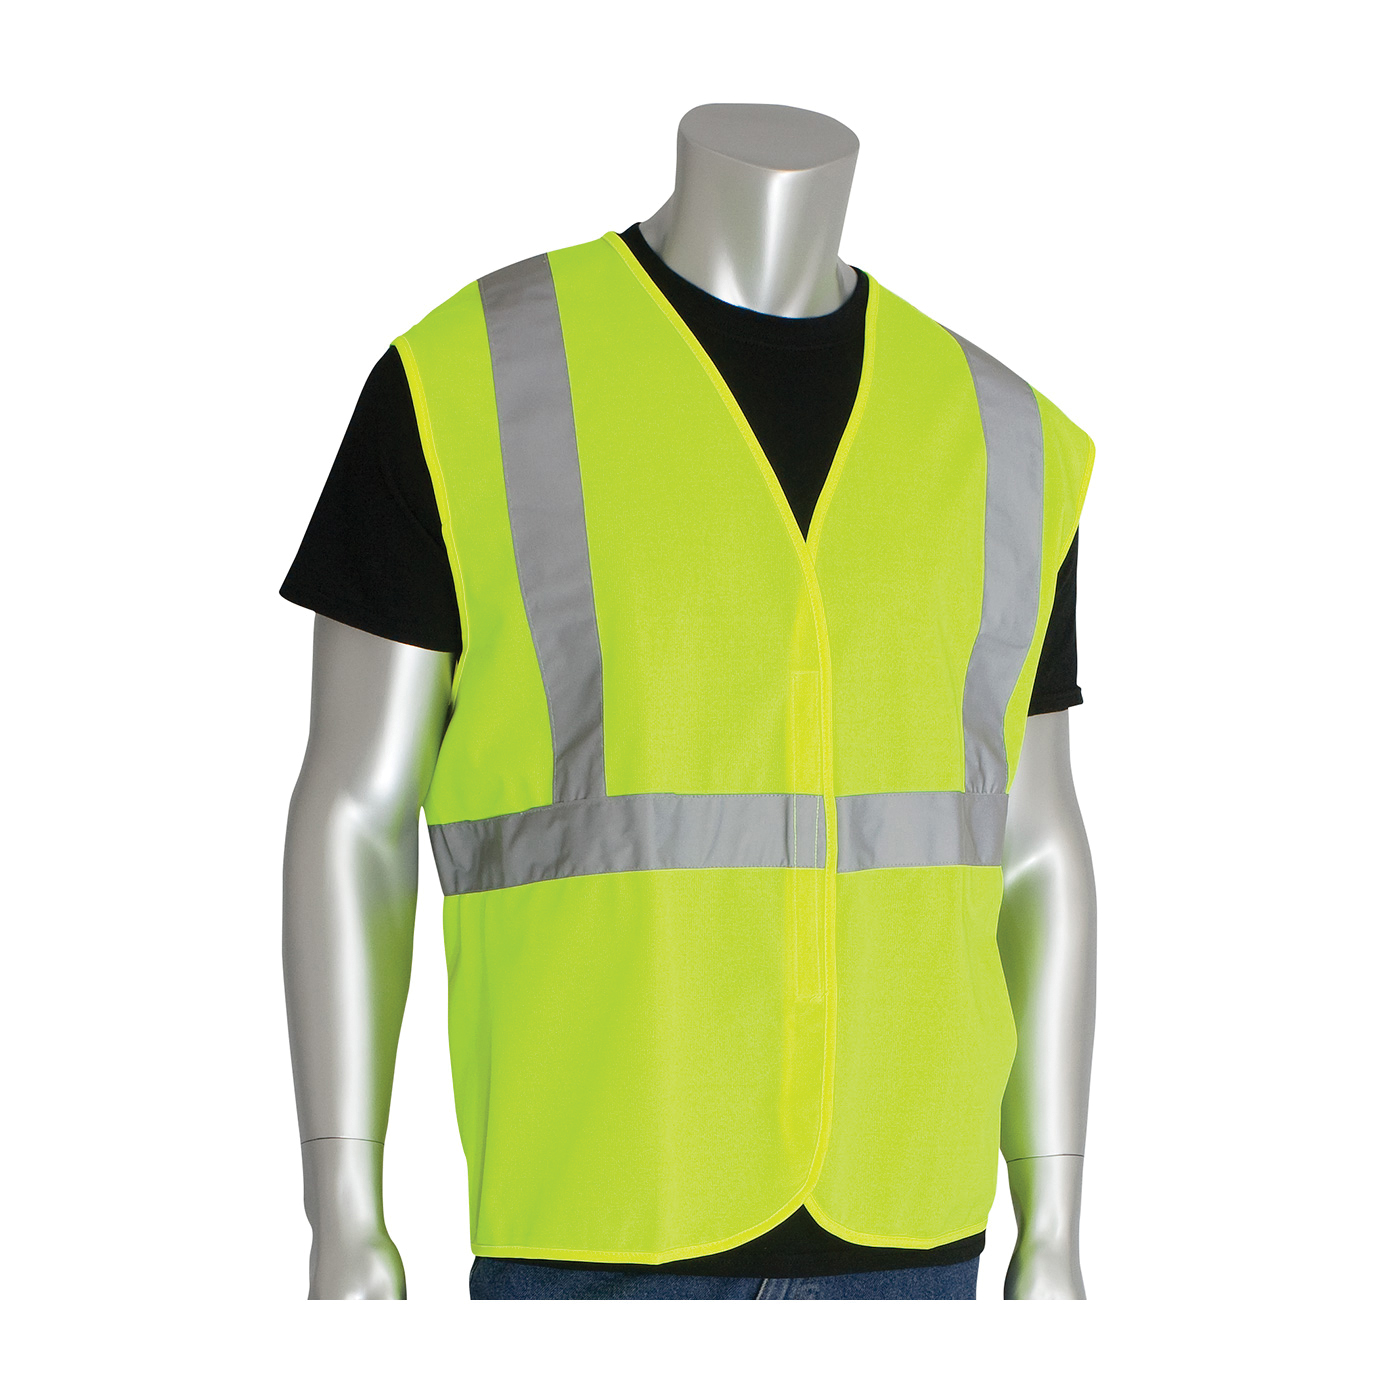 PIP® 302-WCENGLY-5X Solid Vest, 5XL, Hi-Viz Lime Yellow, Polyester, Hook and Loop Closure, ANSI Class: Class 2, Specifications Met: ANSI 107 Type R